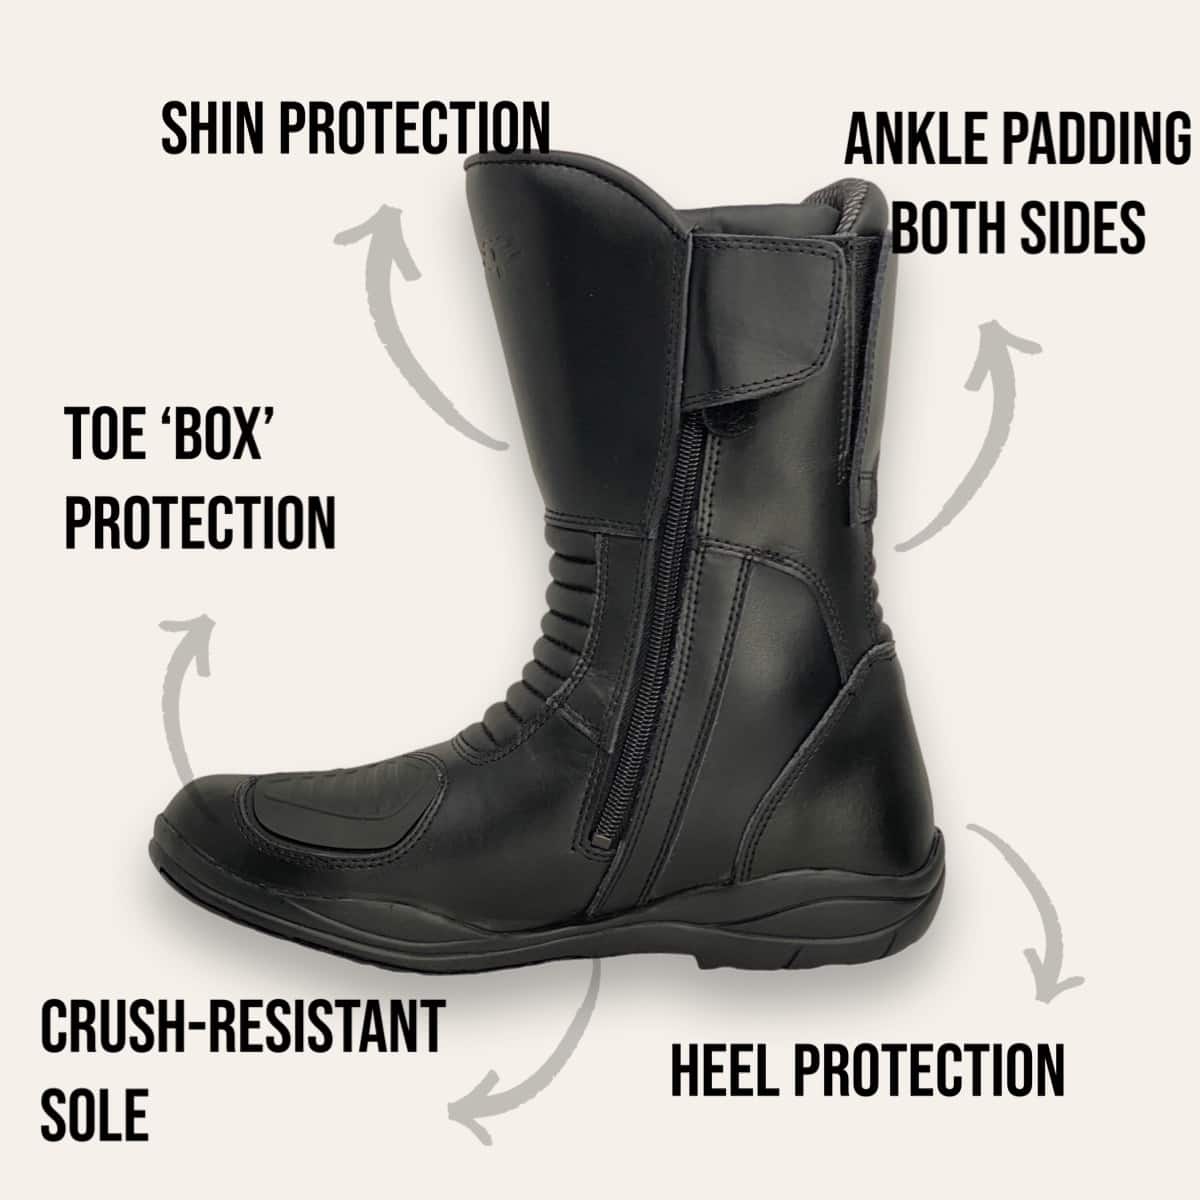 Spada Hurricane 3 CE WP Boots Specifications